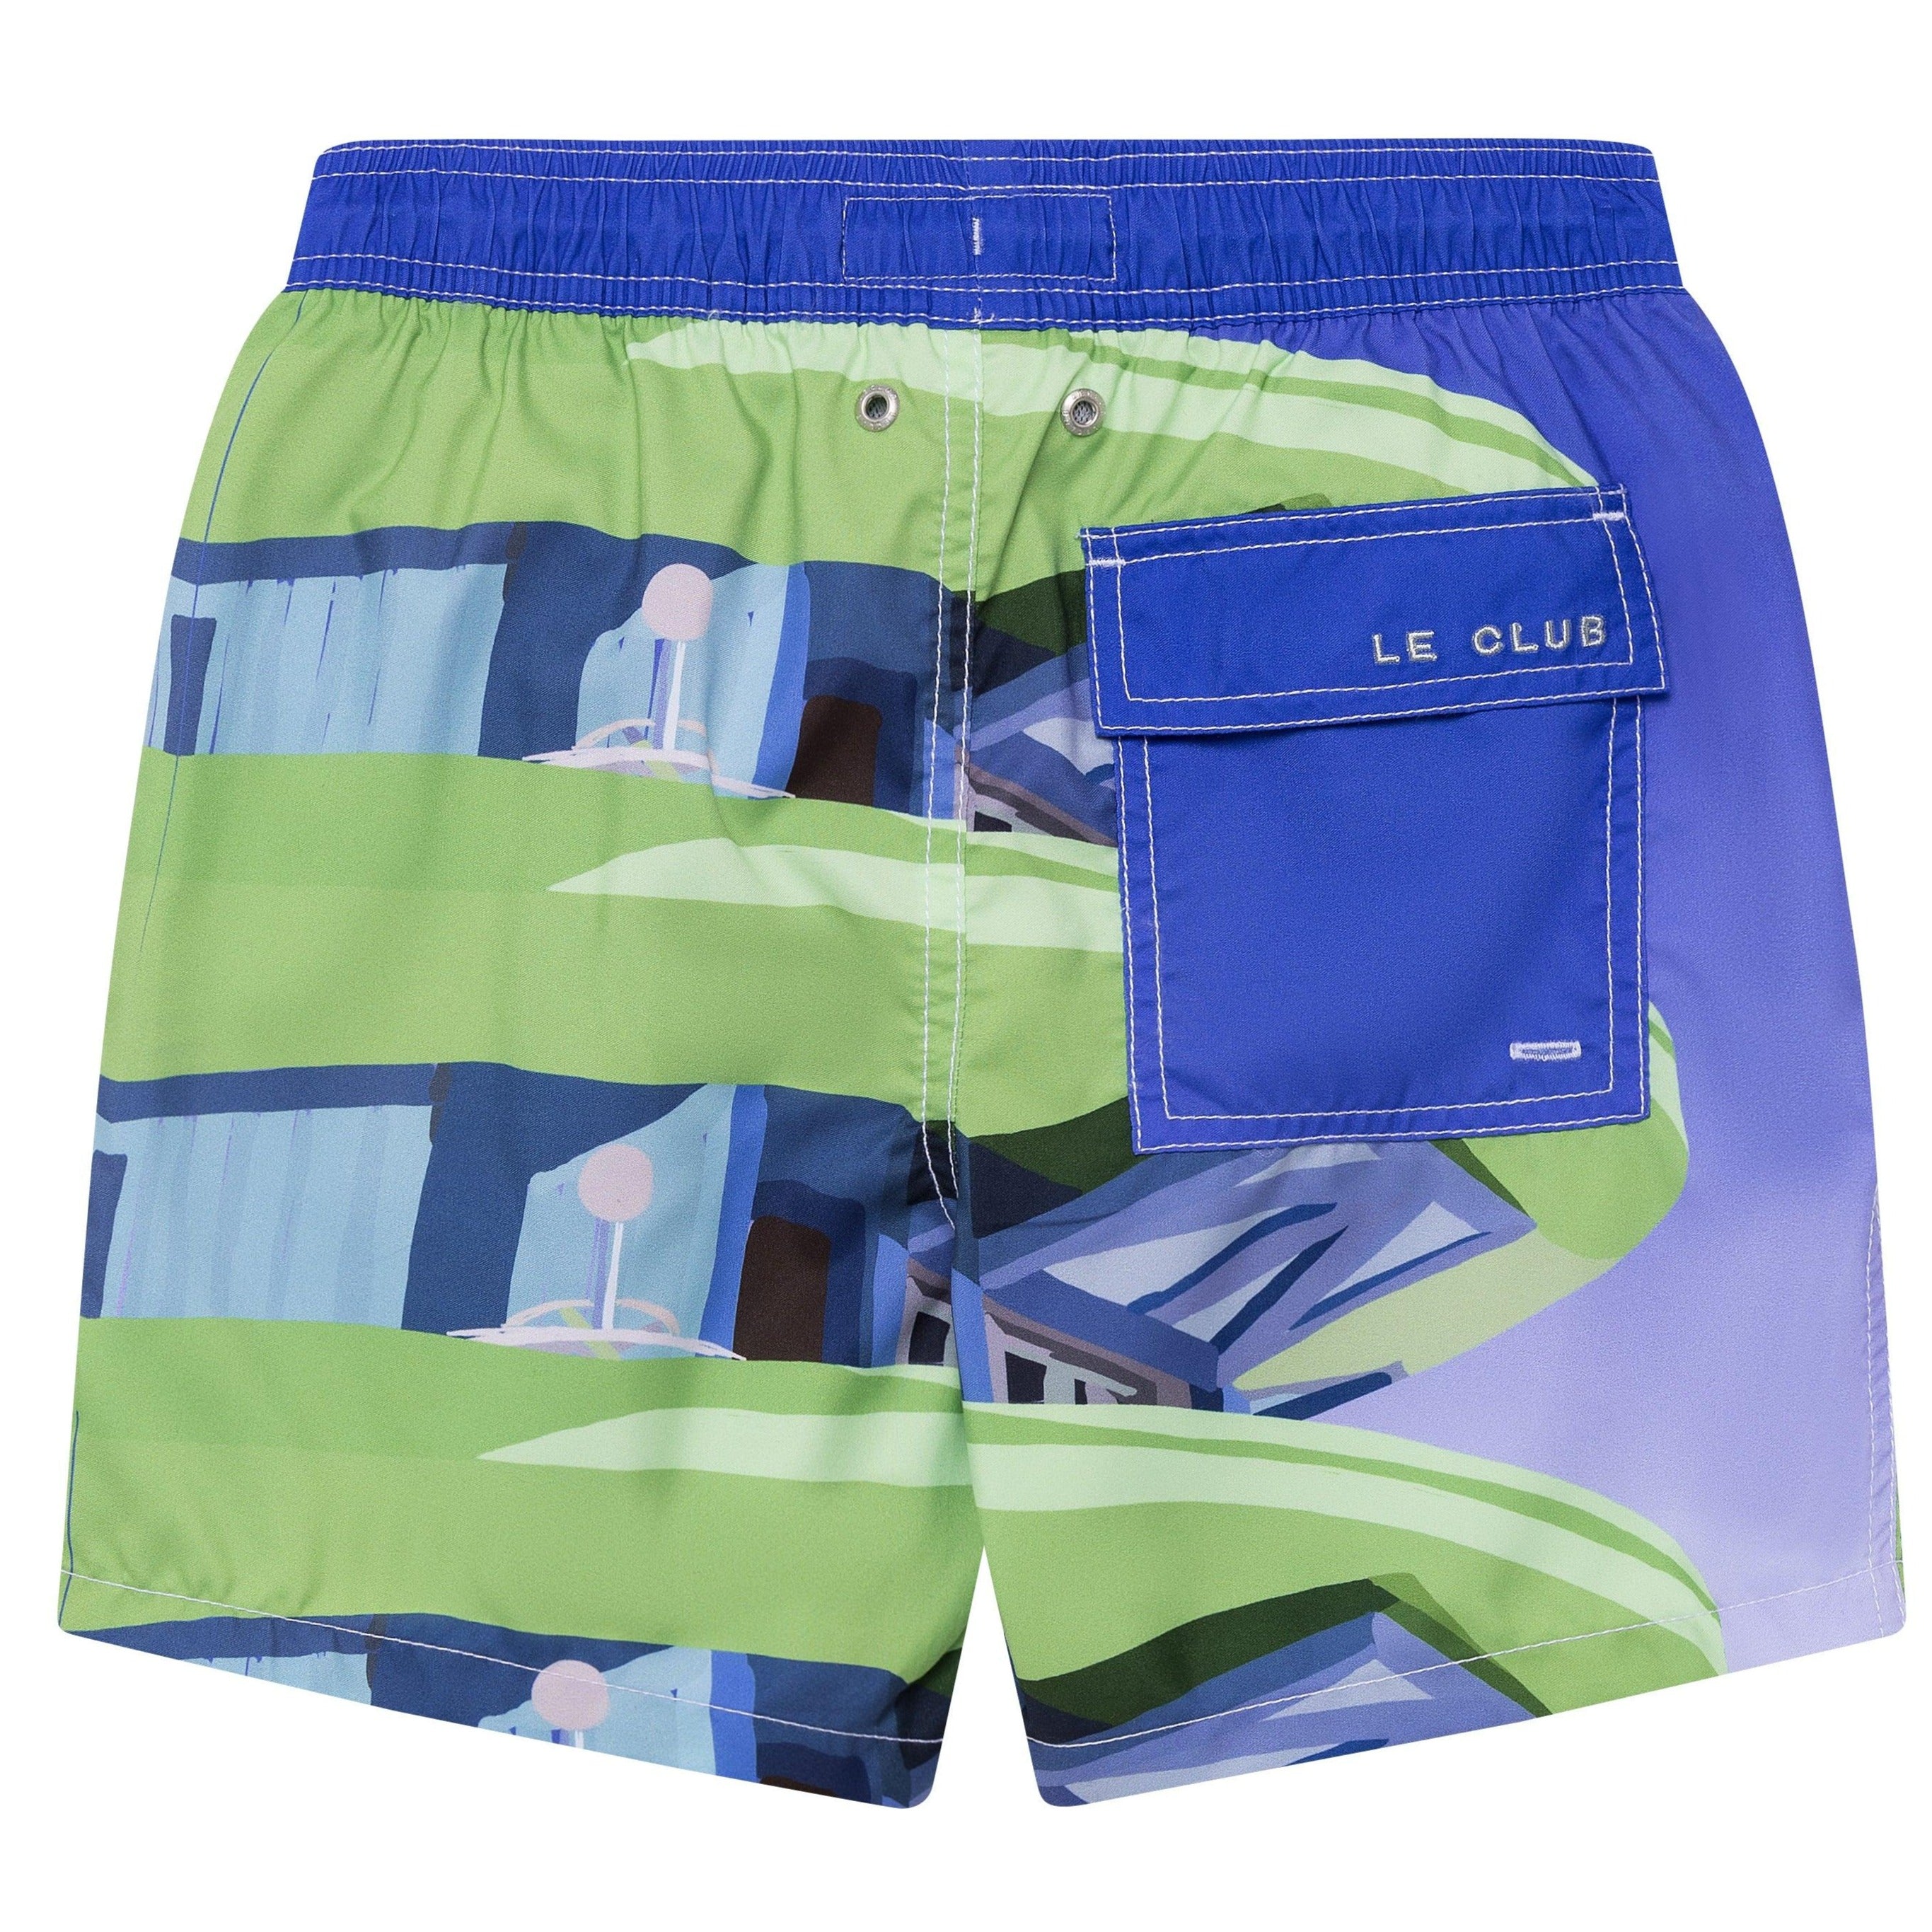 2021 Le Club Men's Swimsuit Leaves Mid Length Trunk 5 inch inseam